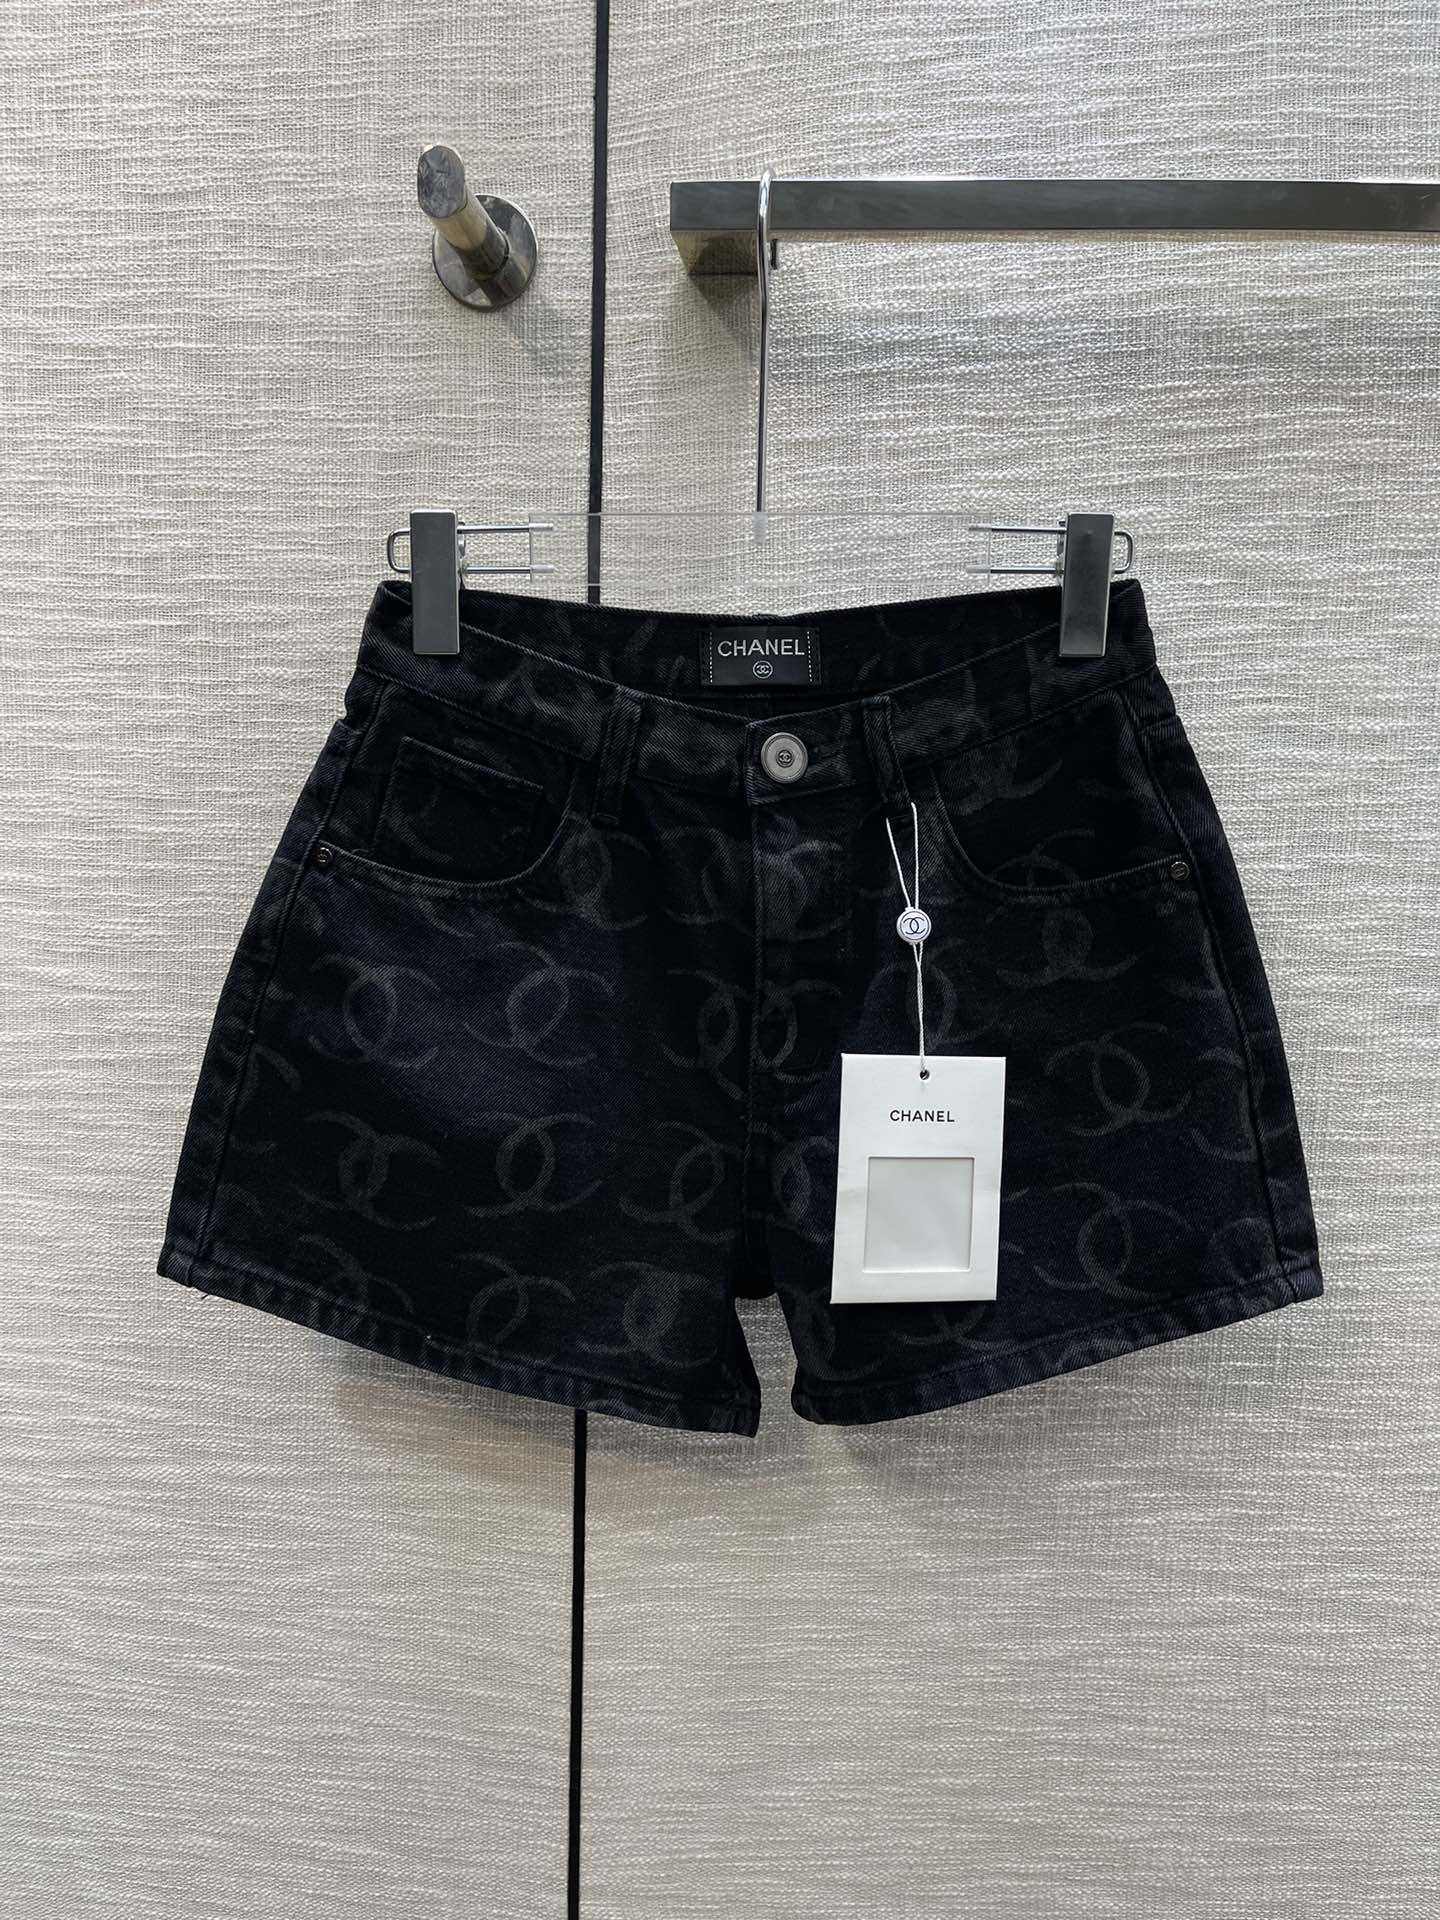 Chanel Clothing Jeans Shorts Sell Online Luxury Designer
 Denim Spring Collection